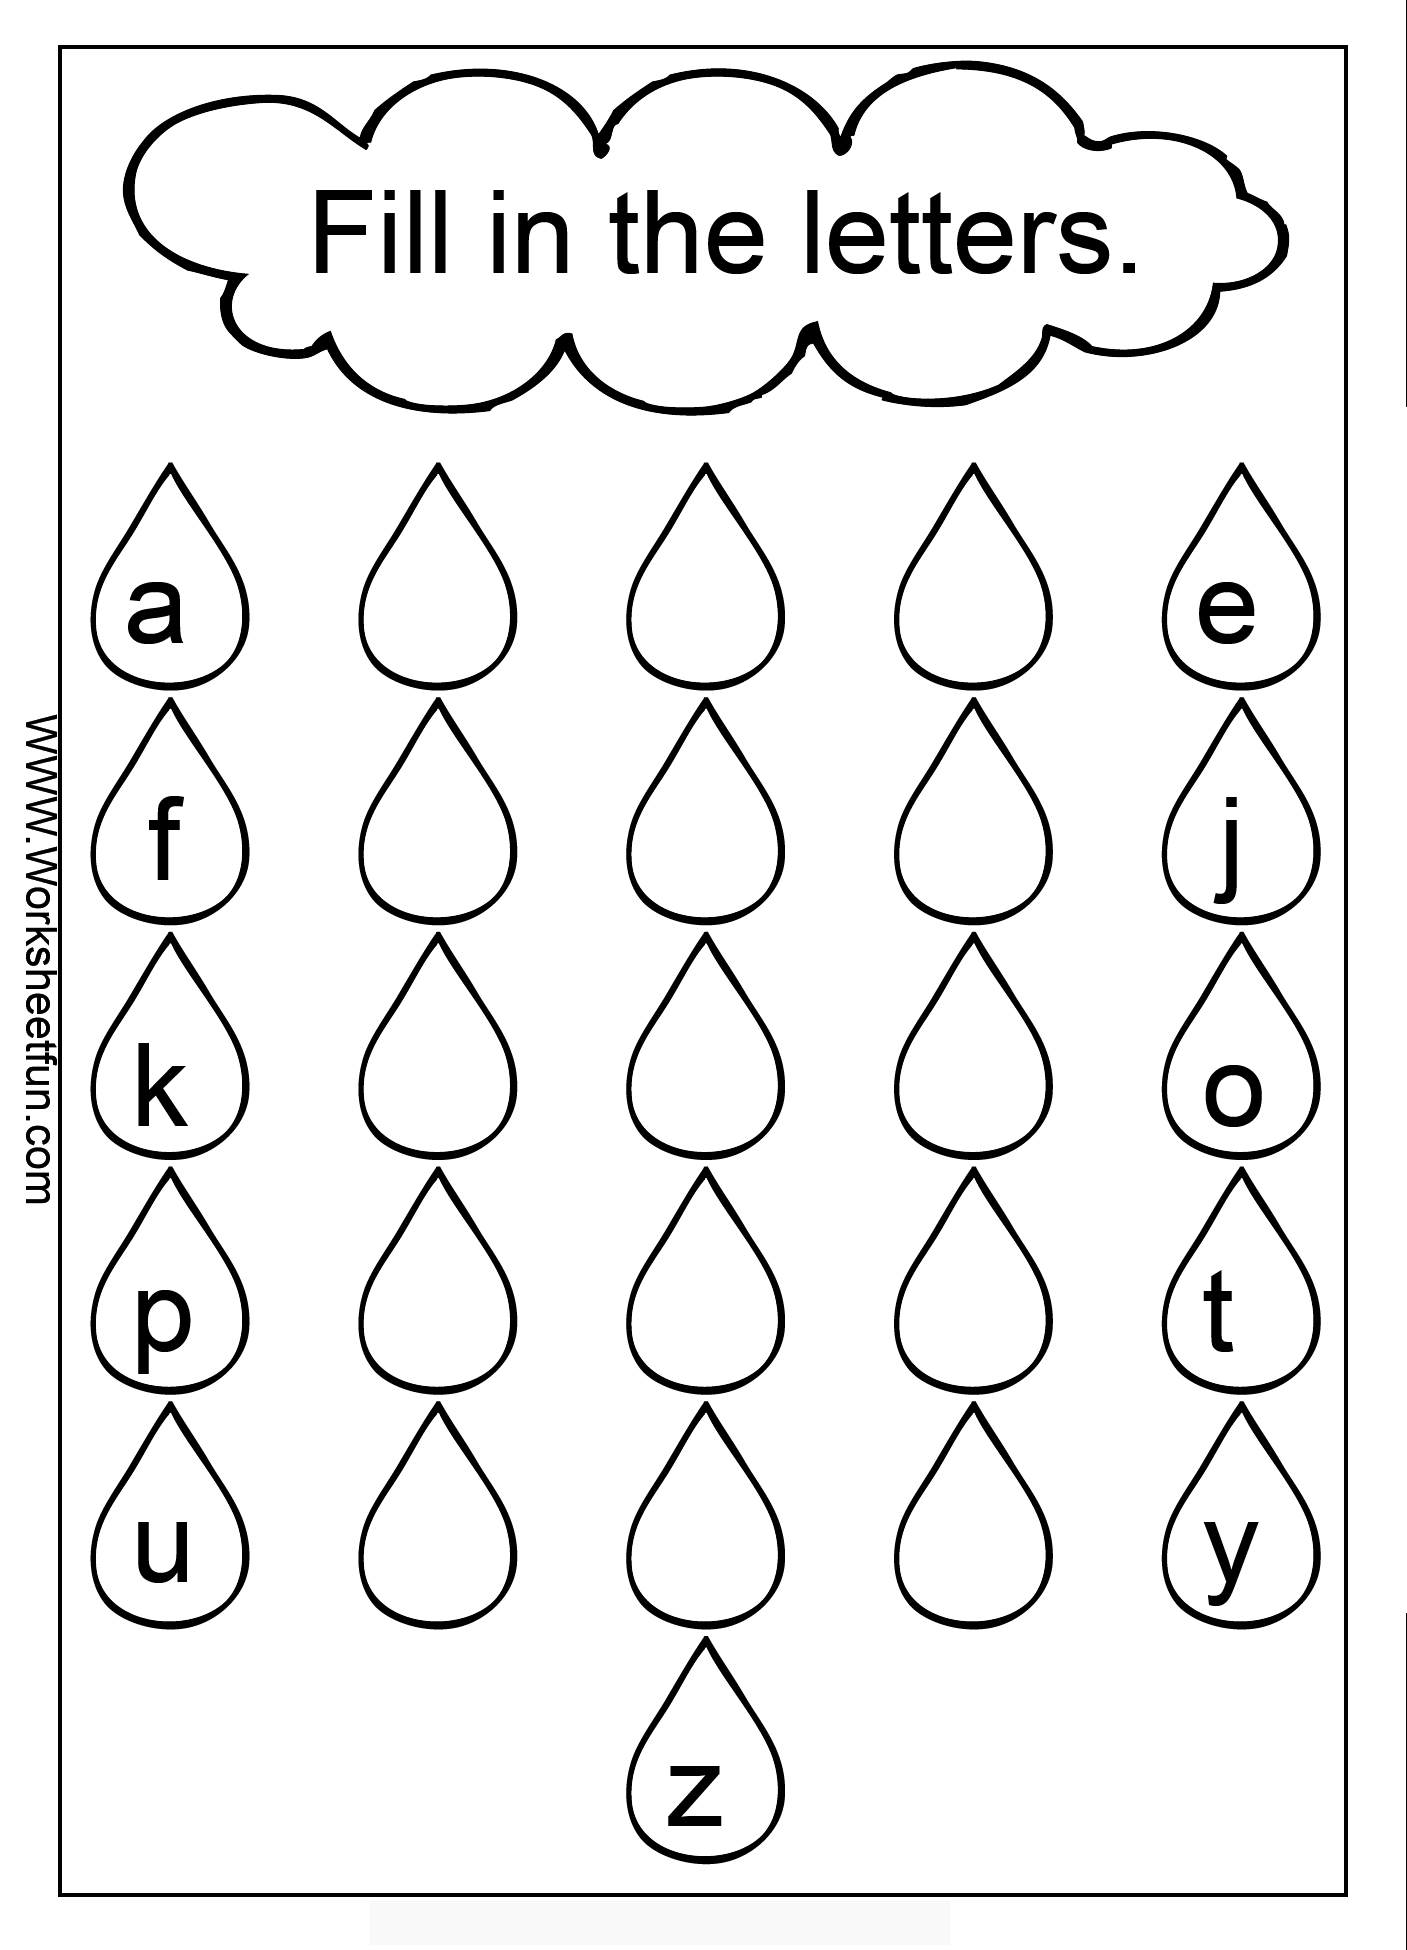 Free Lowercase Letter Worksheets | Missing Lowercase Letters regarding Alphabet Worksheets Missing Letters